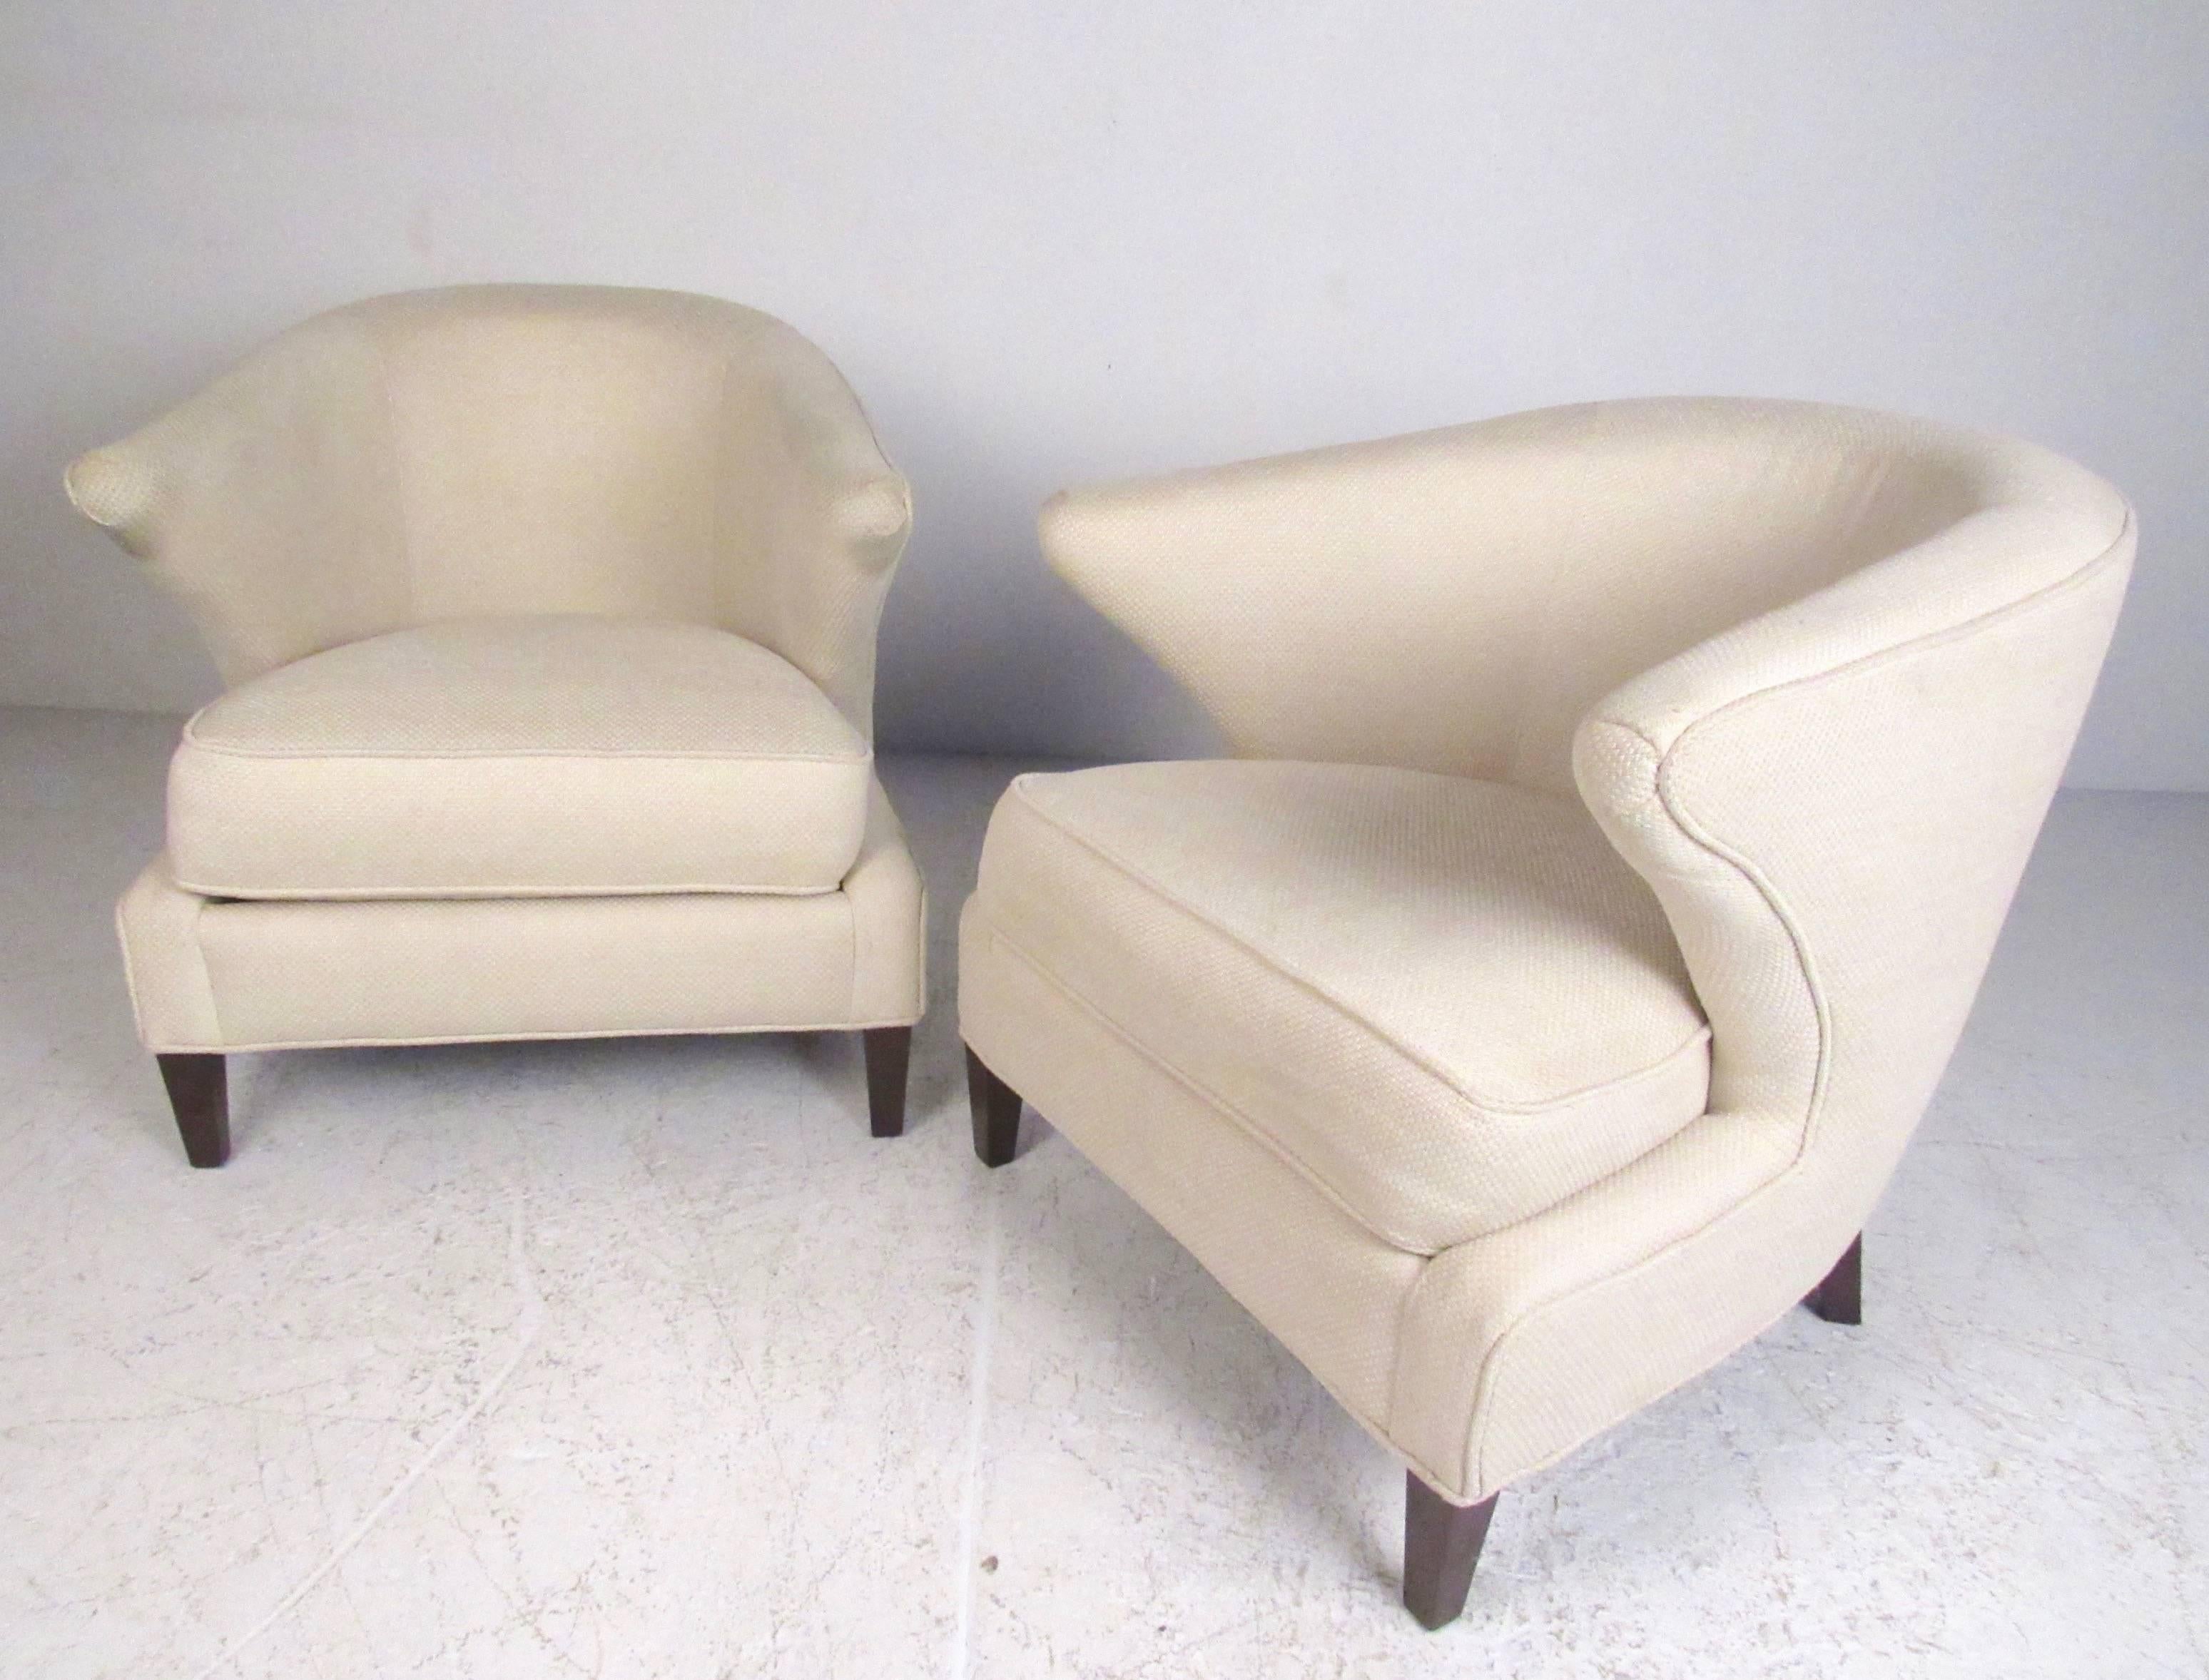 This stylish pair of upholstered lounge chairs feature sculpted barrel back seats with unique arms and hardwood legs. Thayer Coggin combines clean, modern design with comfort and style as illustrated in this pair. Please confirm item location (NY or